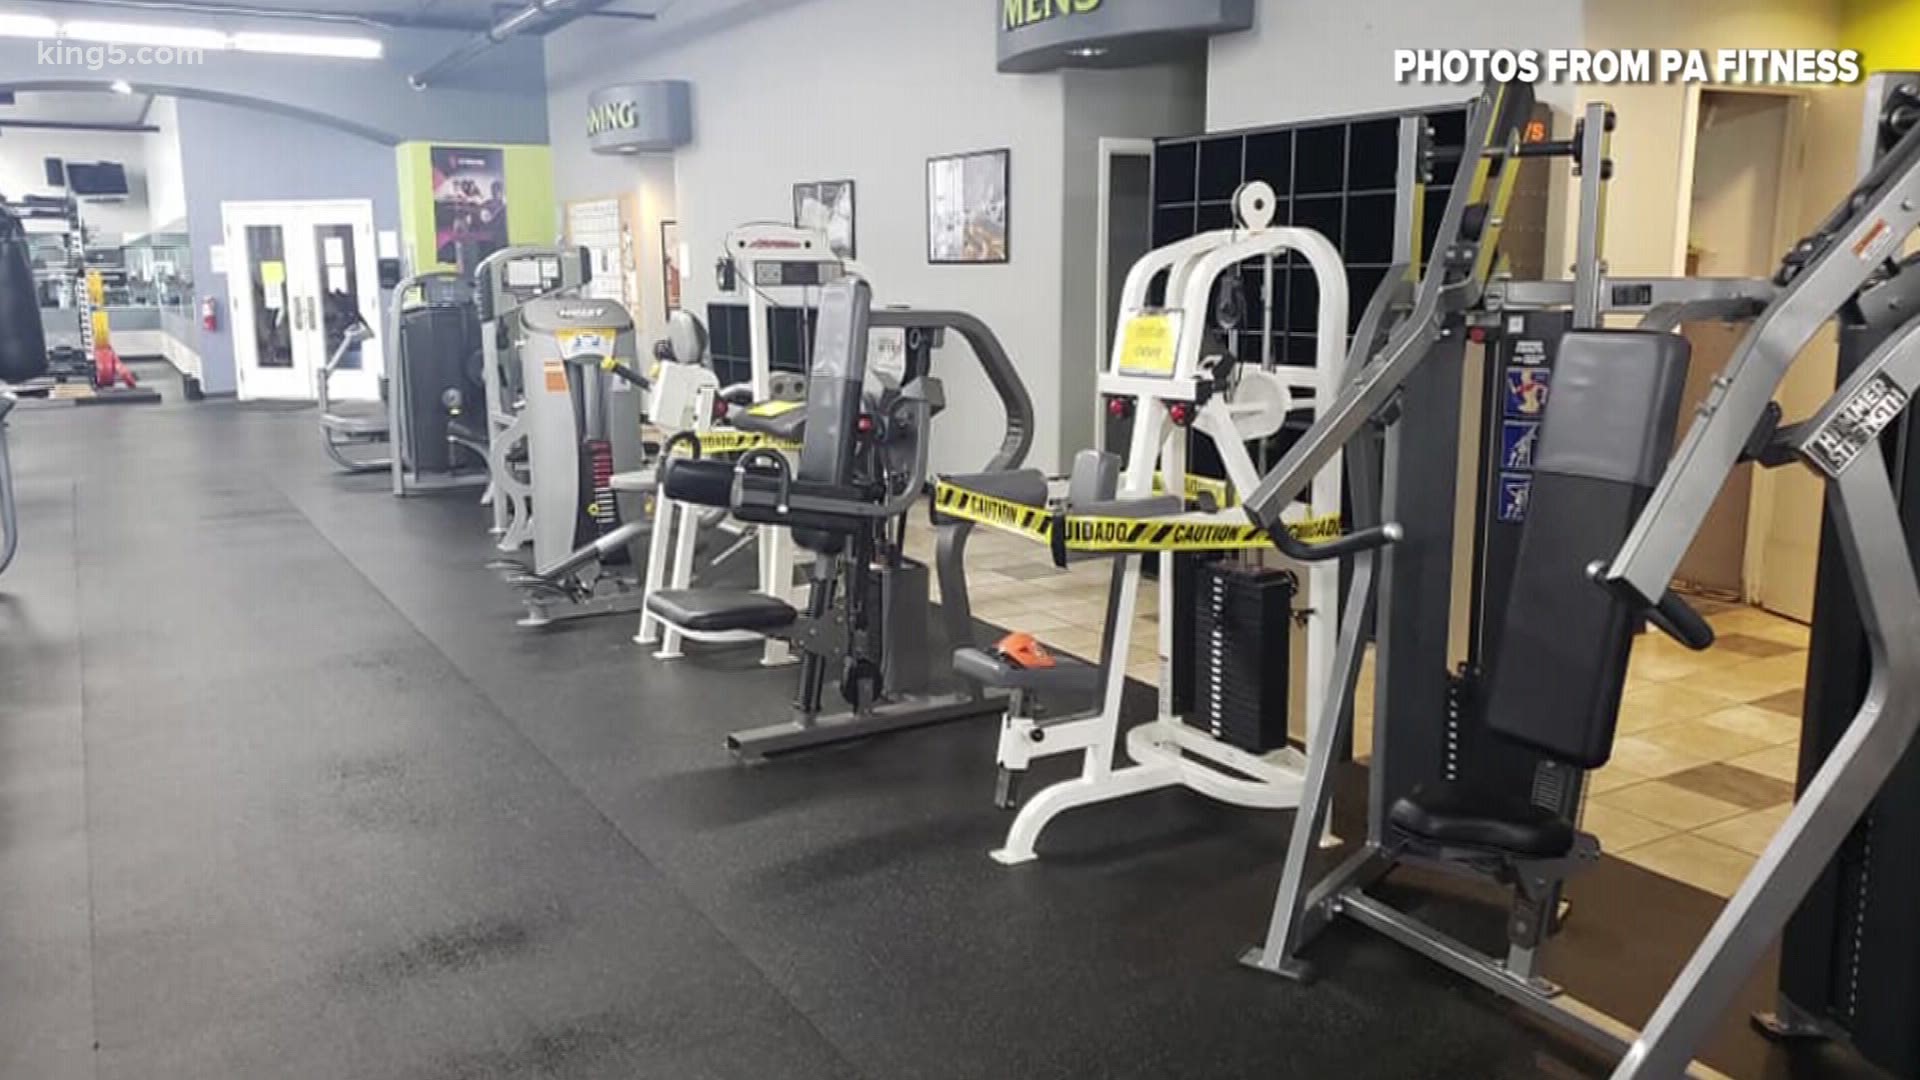 The owner of PA Fitness in Arlington is opening Monday morning in protest of Gov. Jay Inslee’s ‘Stay Home, Stay Healthy’ order.